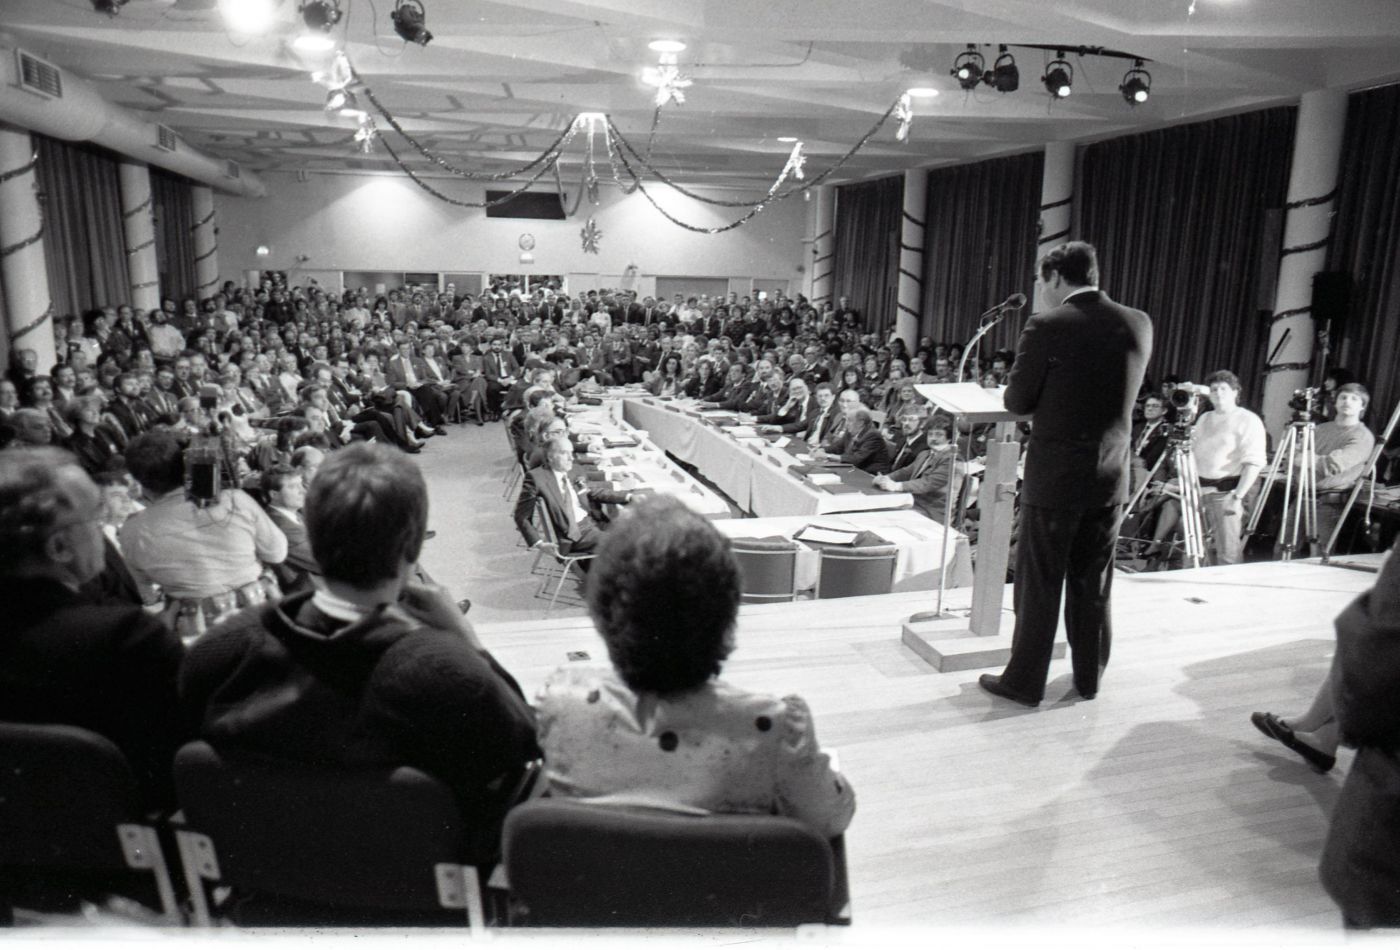 Black and white photograph of a man seen from behind. He is wearing a suit, standing on a stage, and talking into a microphone to address a large audience in a packed room. Some audience members are sitting around tables arranged in a “U” shape, while others sit and stand in rows around the perimeter, including journalist with television cameras.